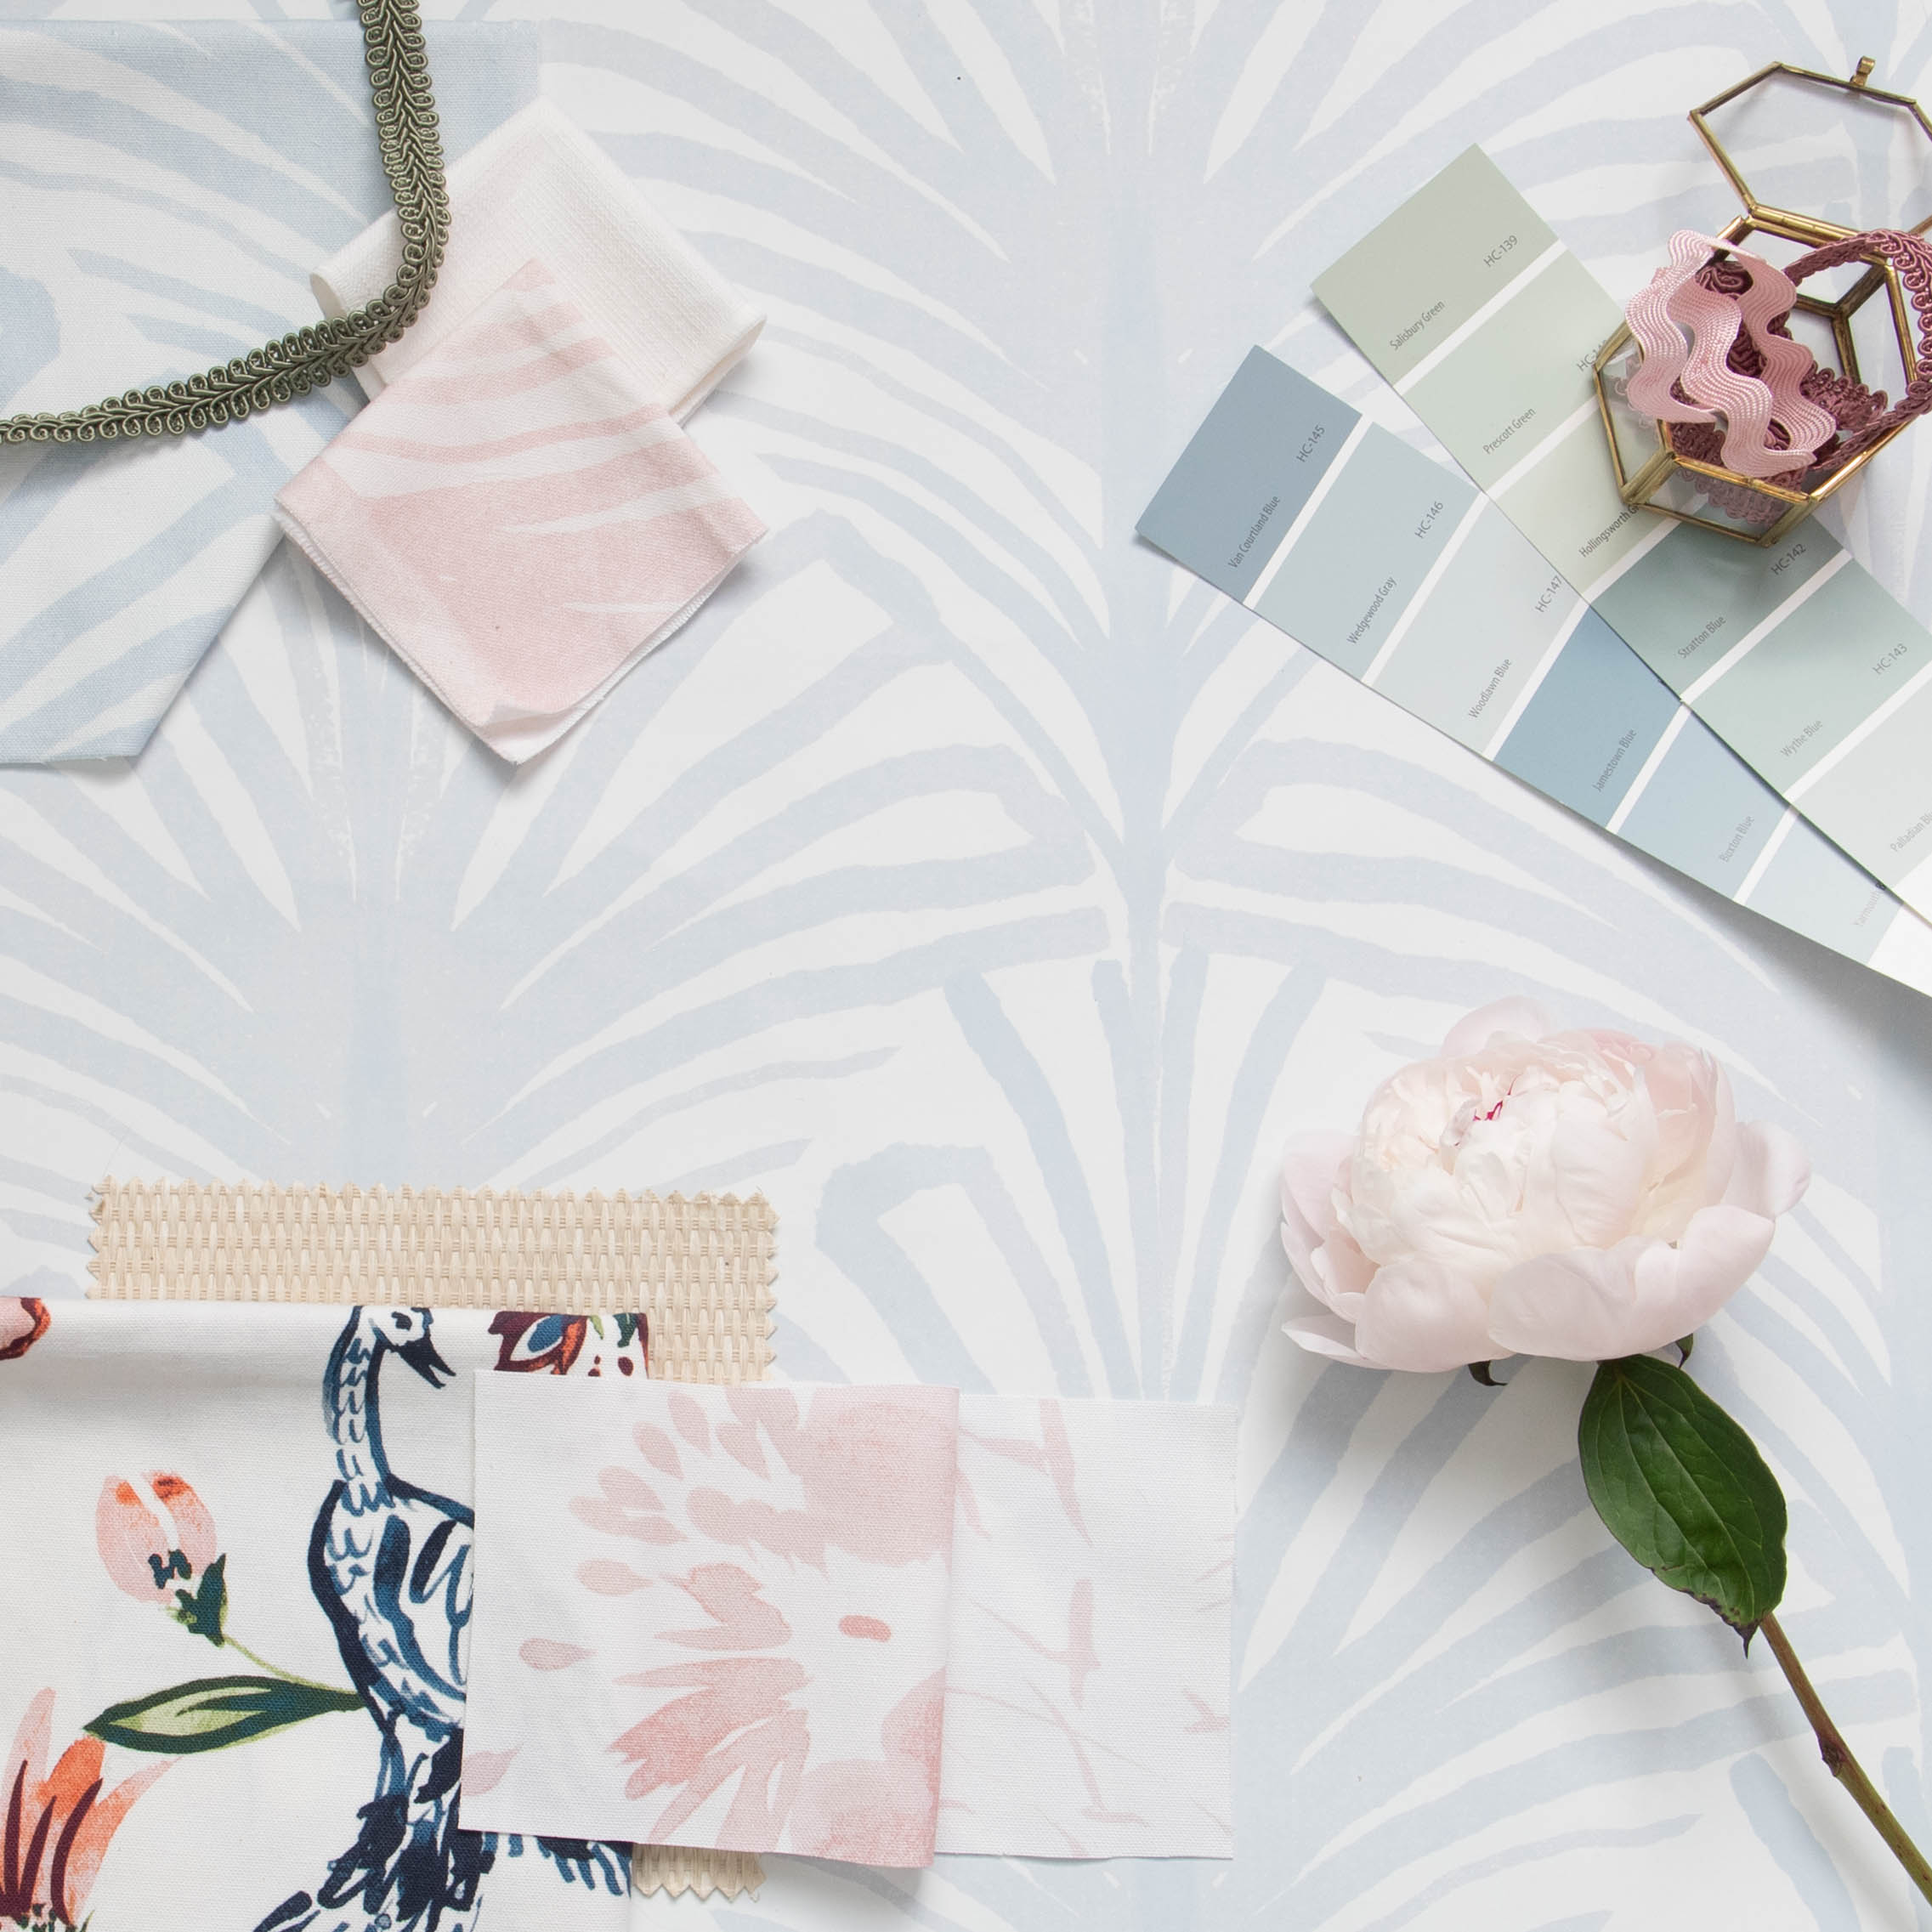 Interior design moodboard and fabric inspirations with Sky Blue Palm Printed Swatch, Cream Chinoiserie Printed Swatch, and Pink Floral Printed Swatch